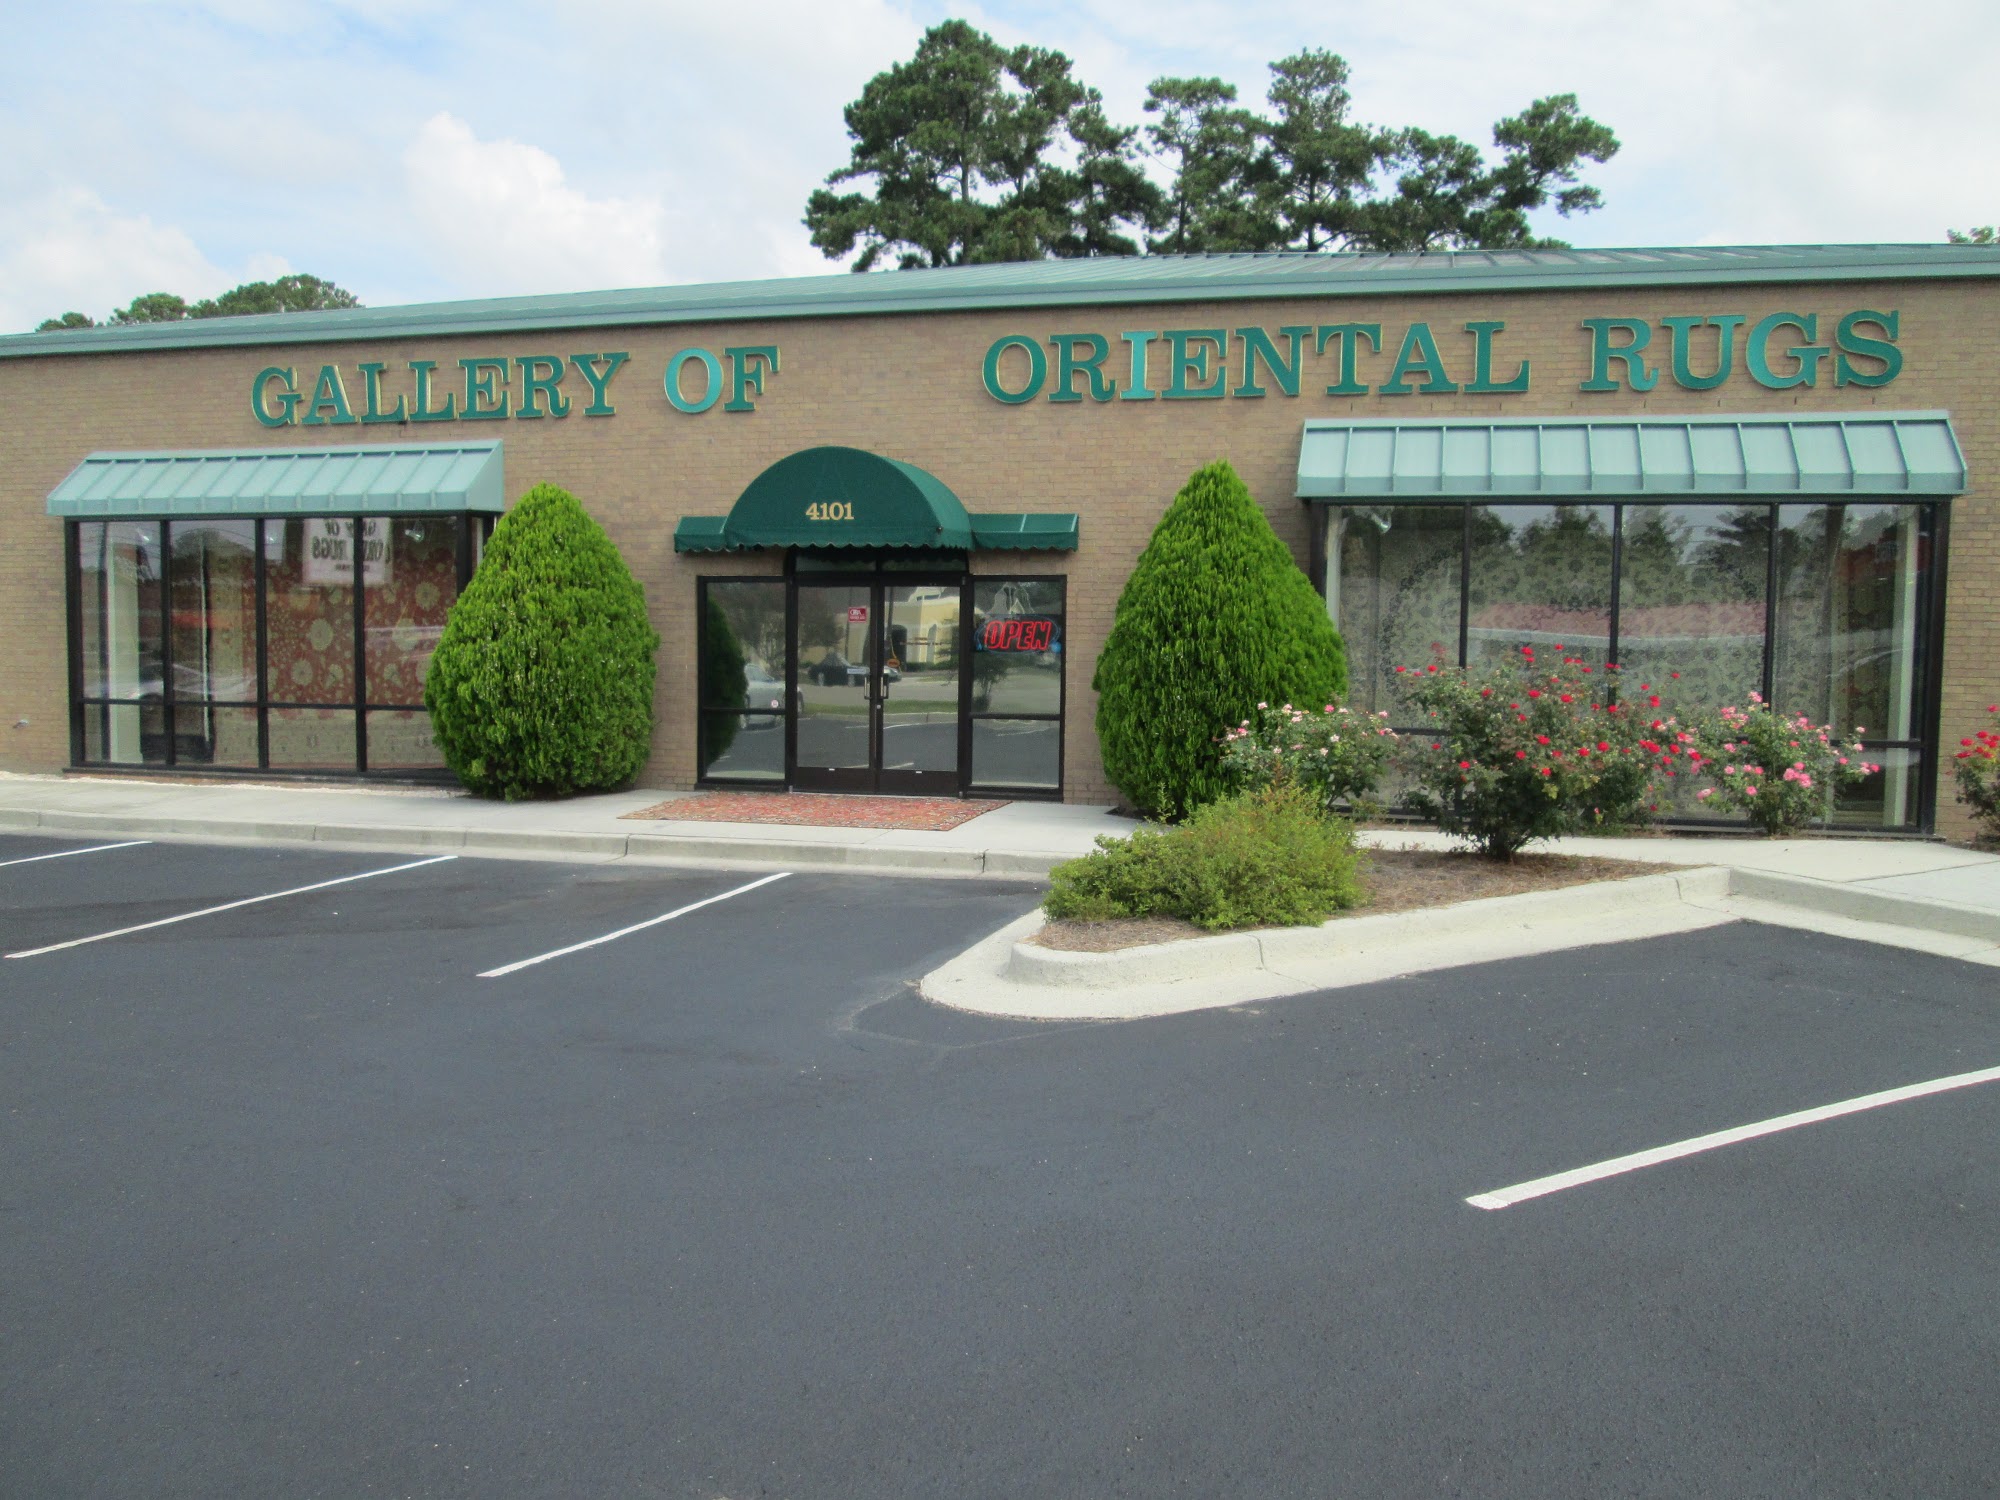 Gallery of Oriental Rugs & Mulberry Interiors